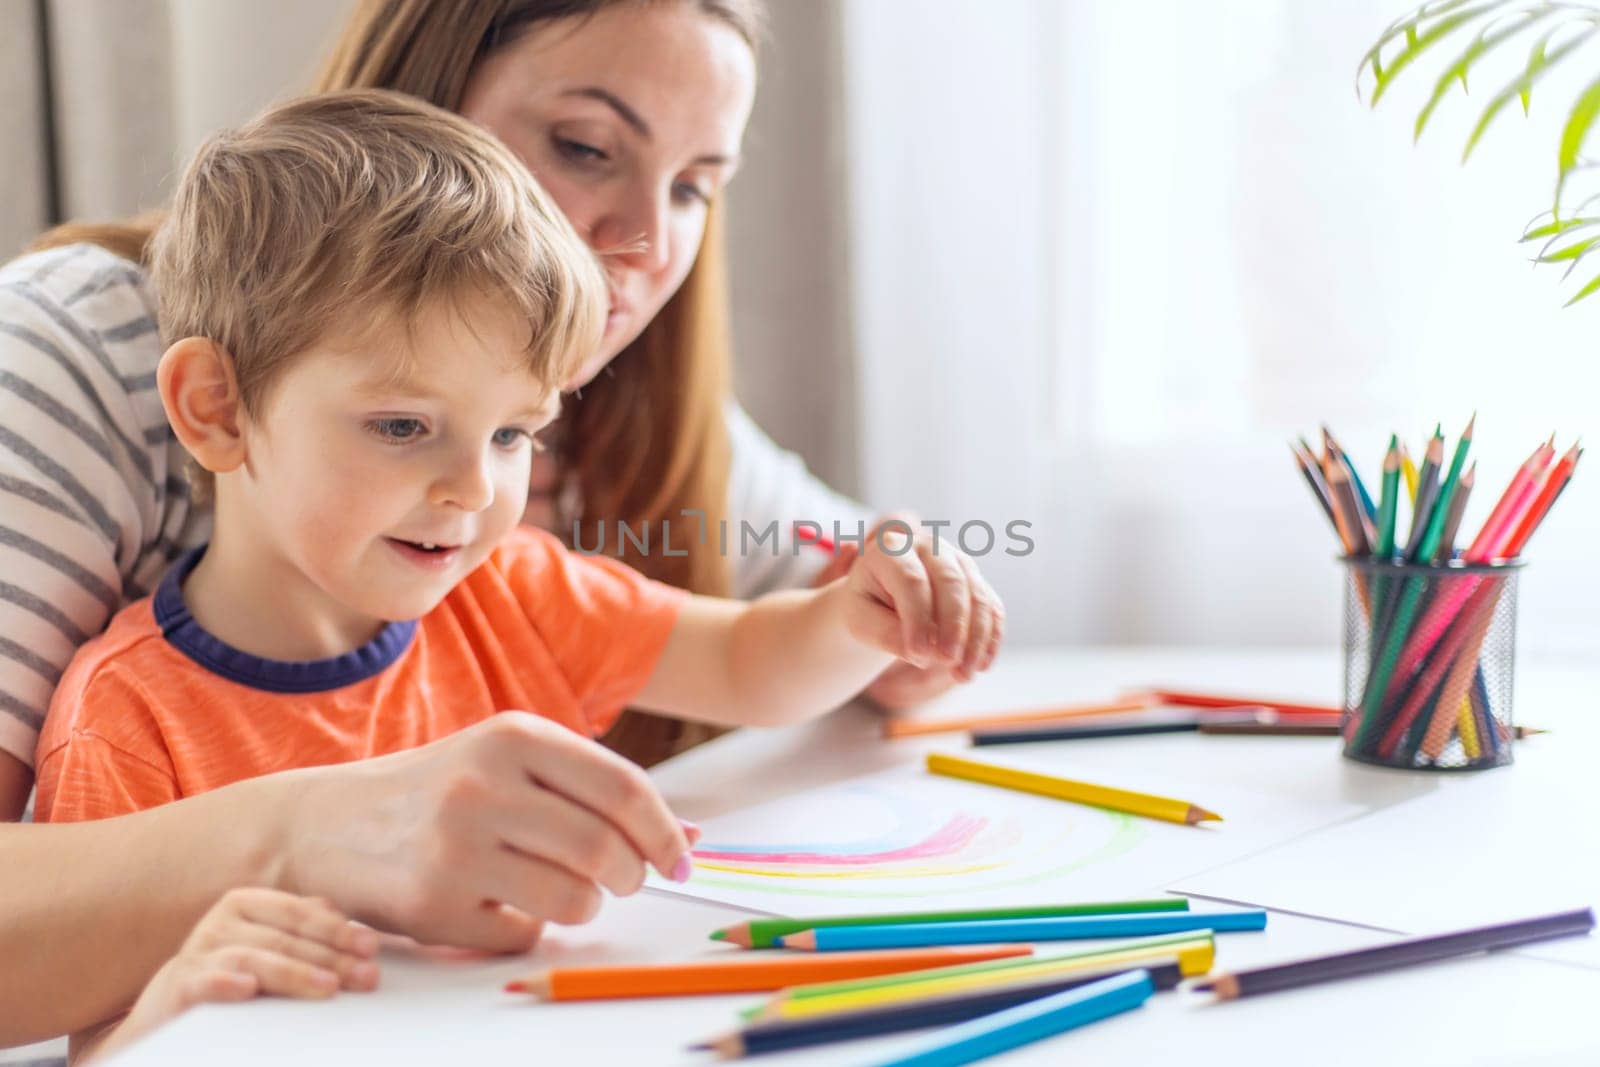 Mother and Child Enjoying Drawing Time Together by andreyz